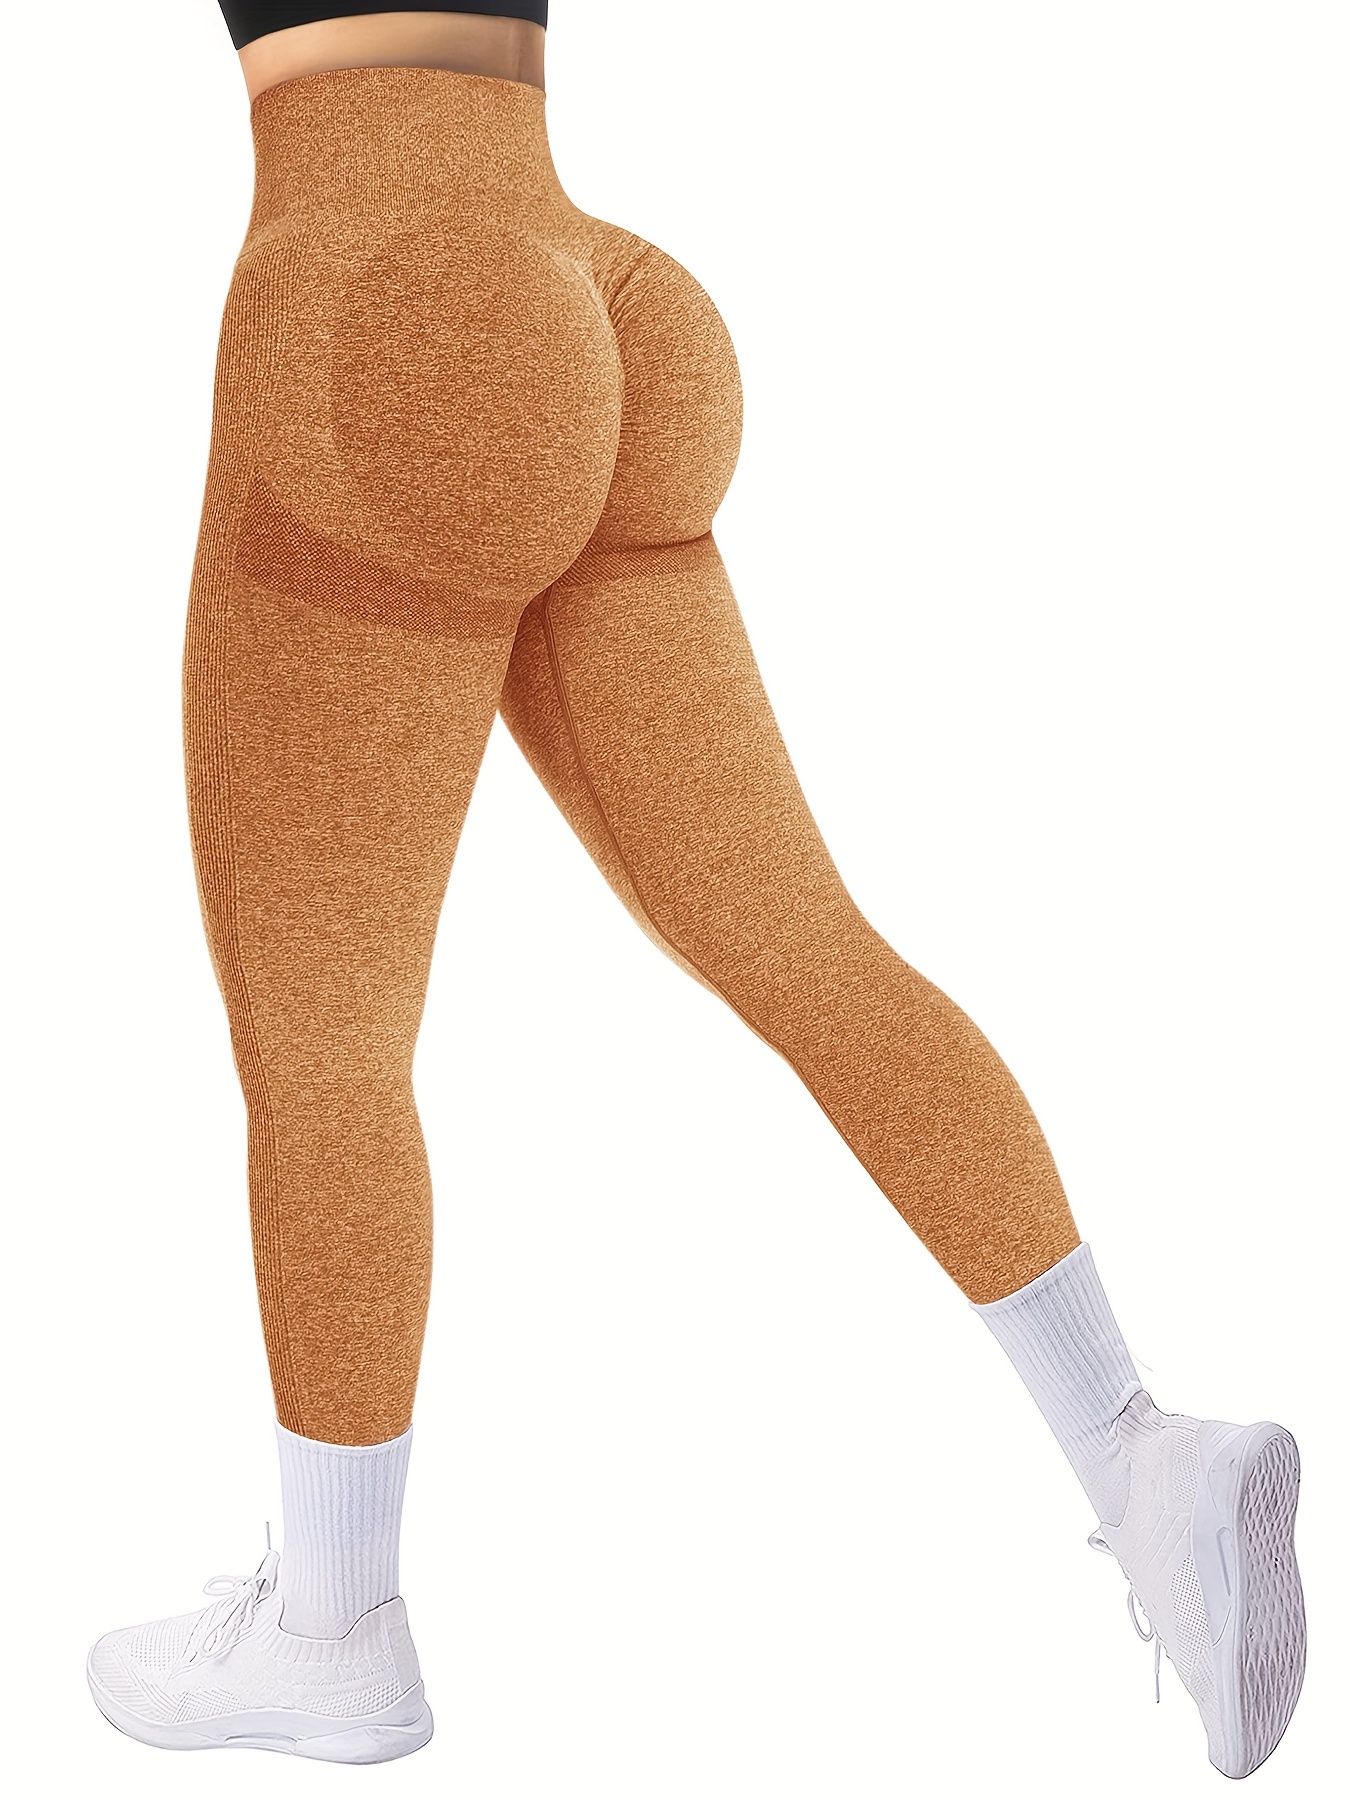 People Say These Scrunch-Butt Leggings Are *Wildly* Flattering